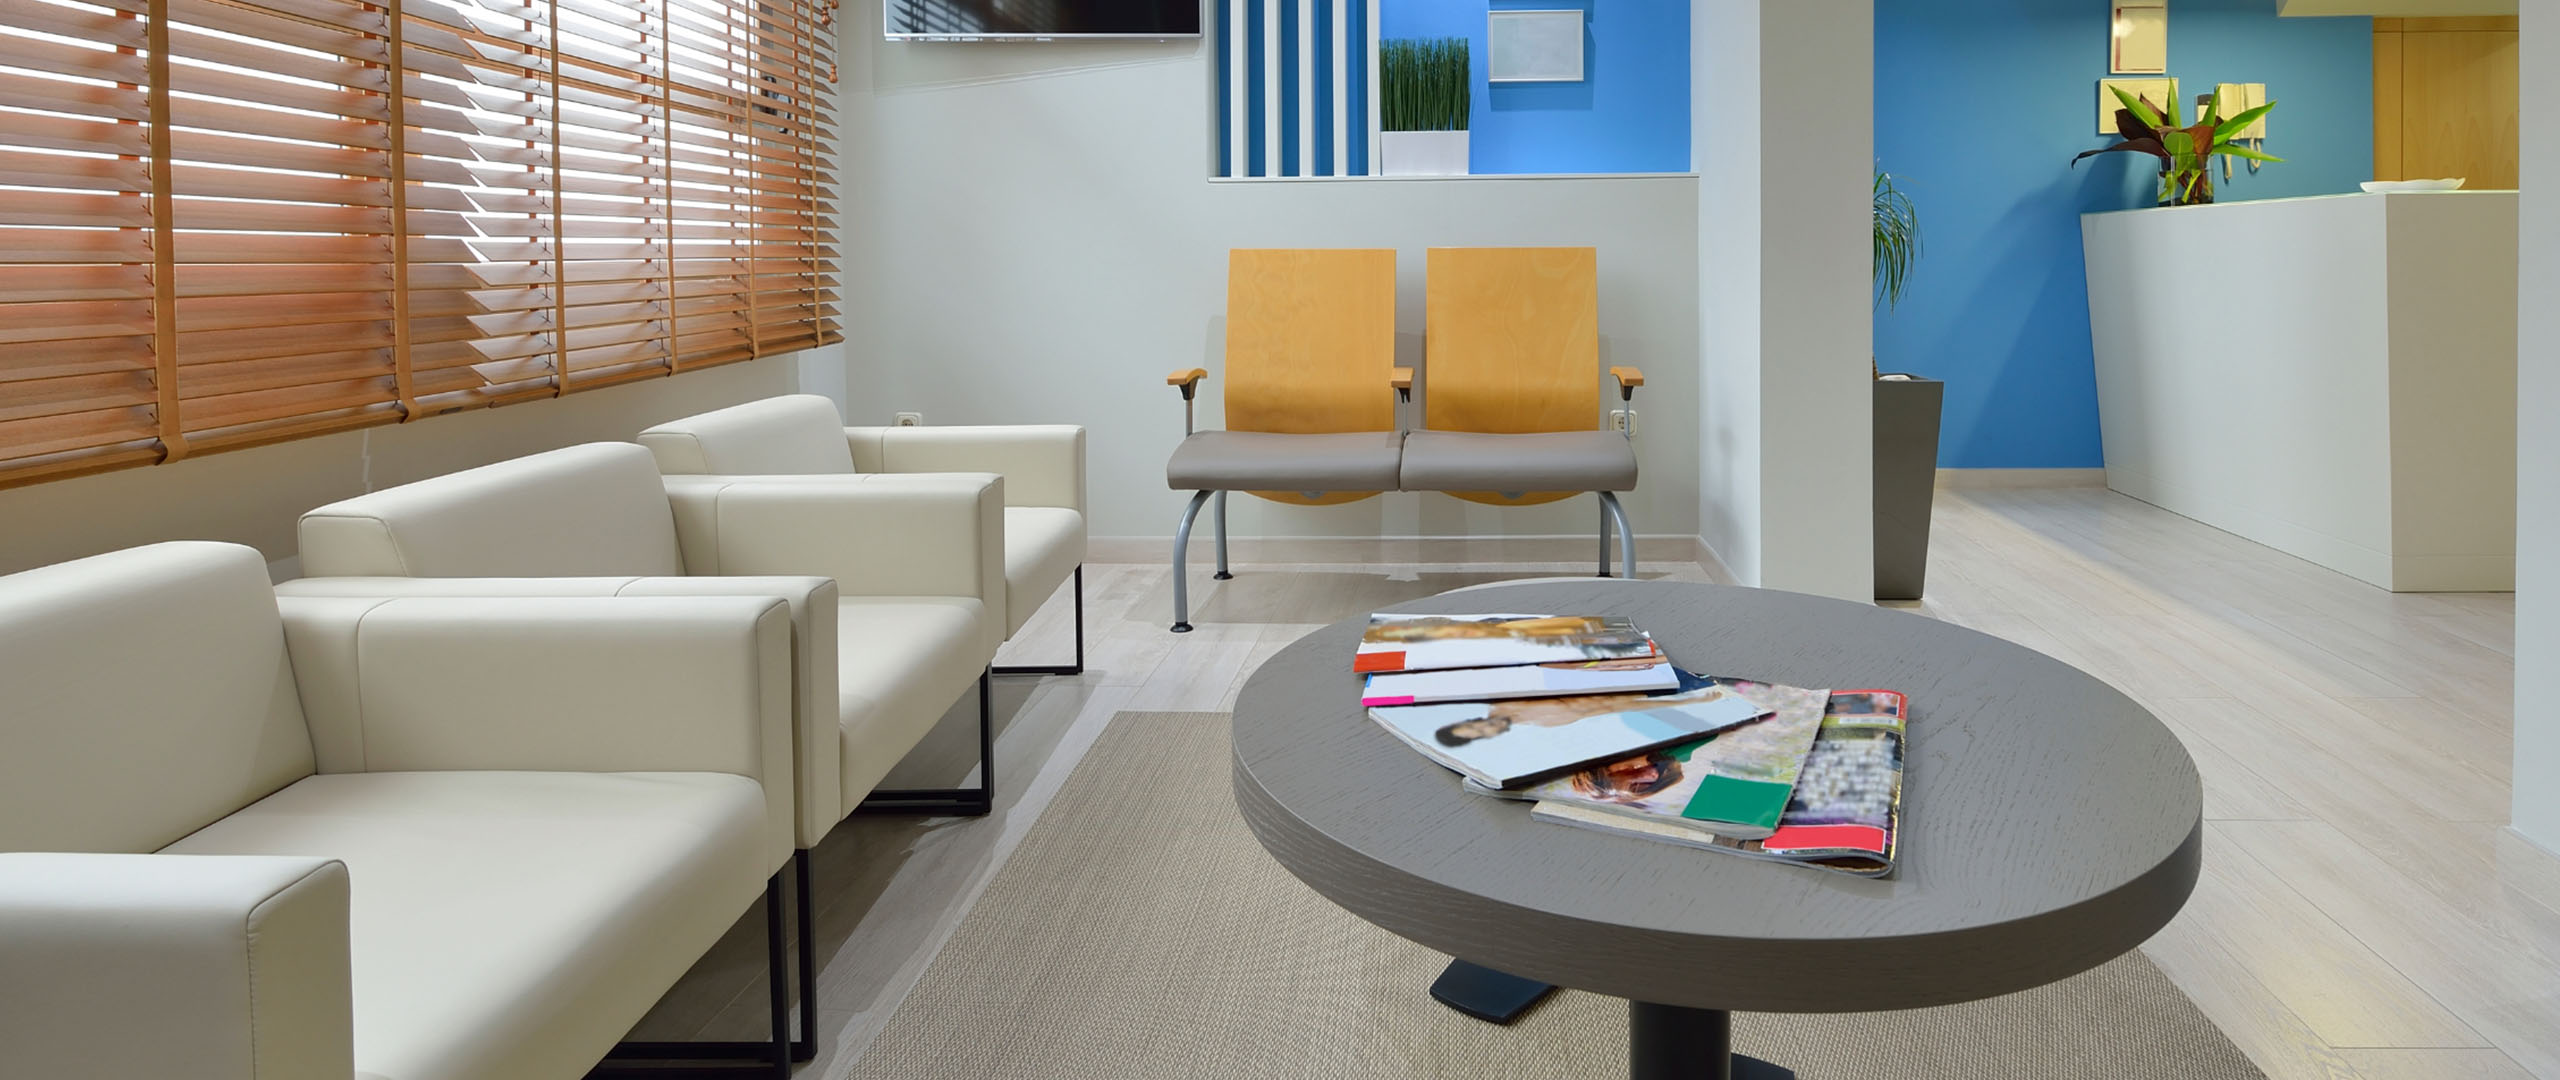 Healthcare and Aged Care Furniture